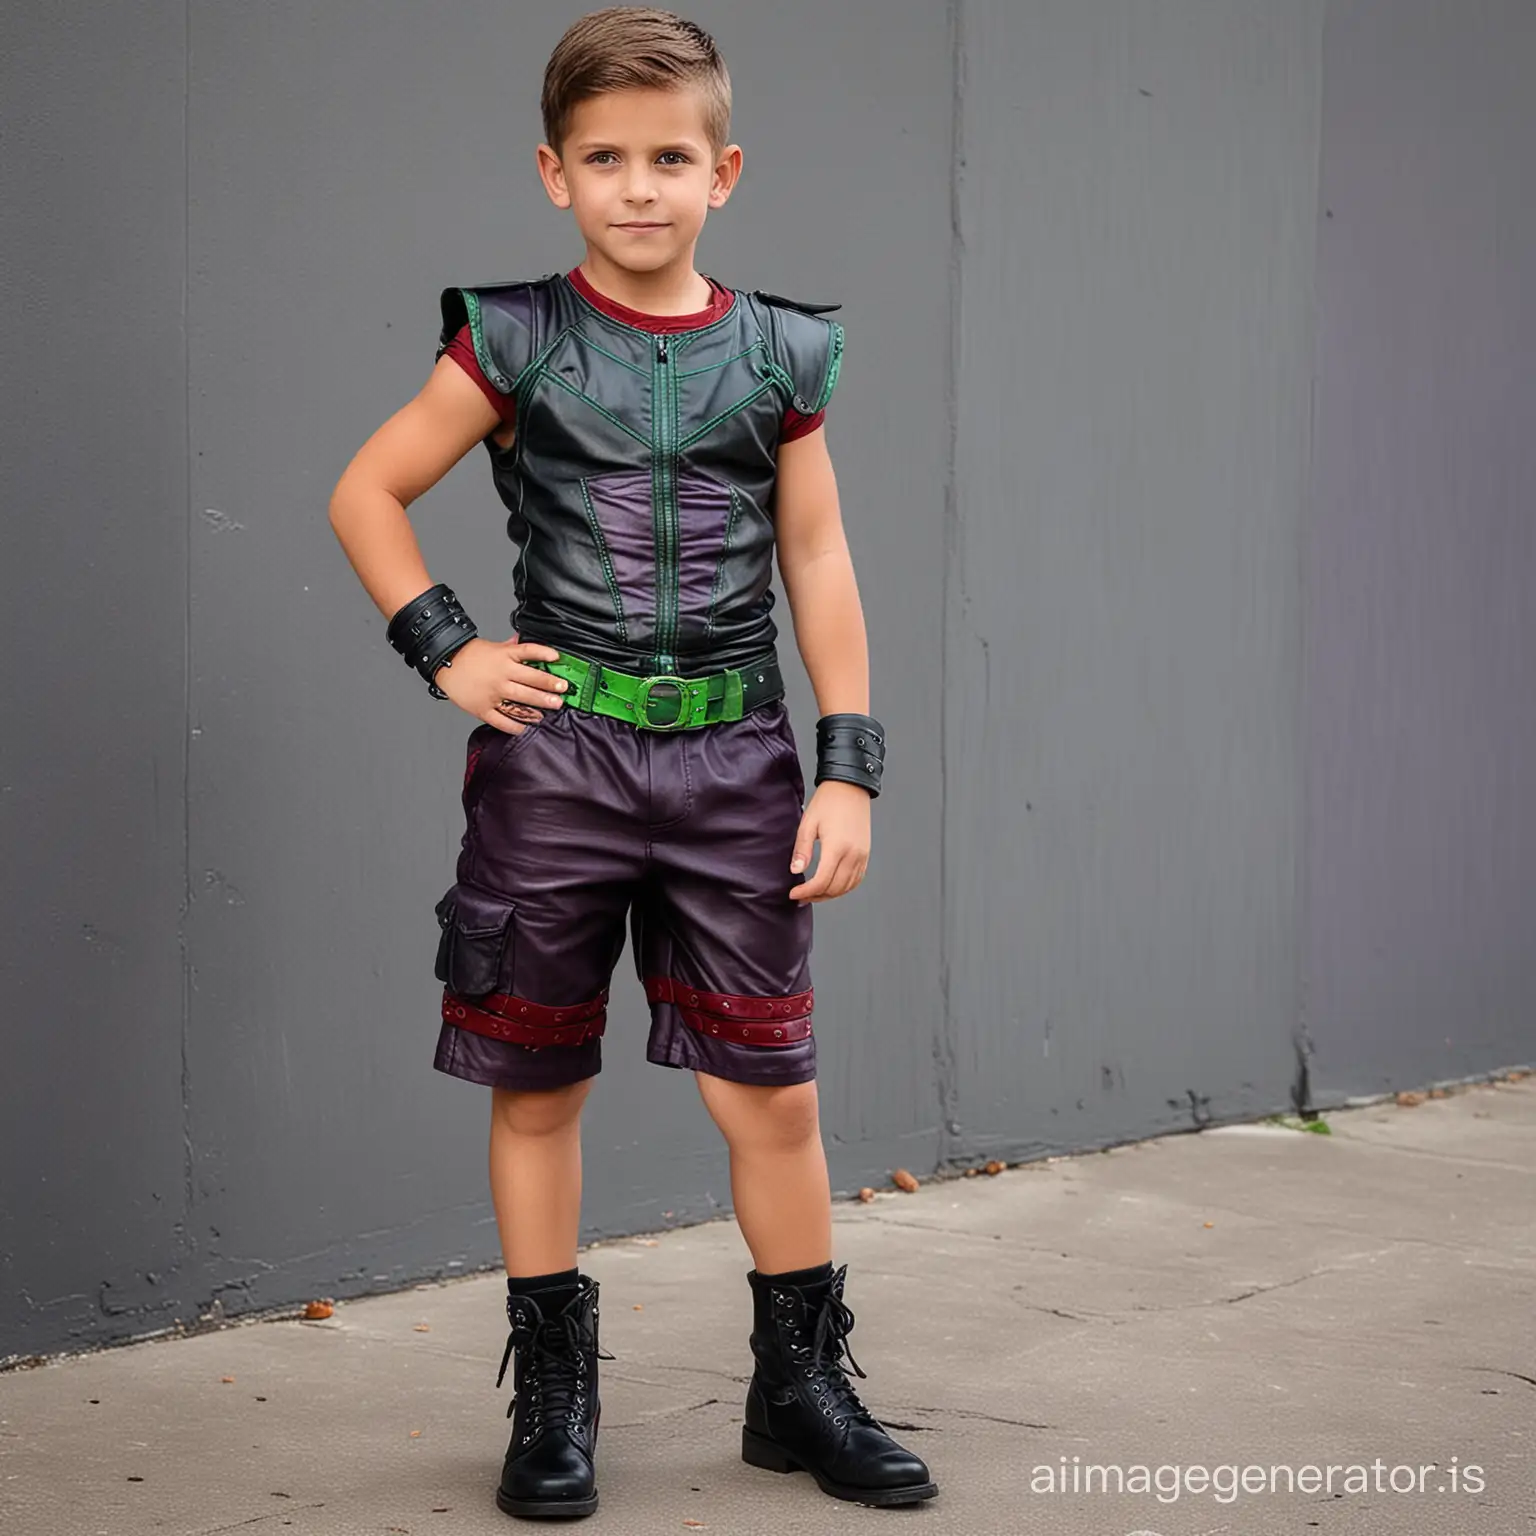 8YearOld-Boy-Villain-in-Intimidating-Leather-Outfit-with-Purple-and-Red-Shades